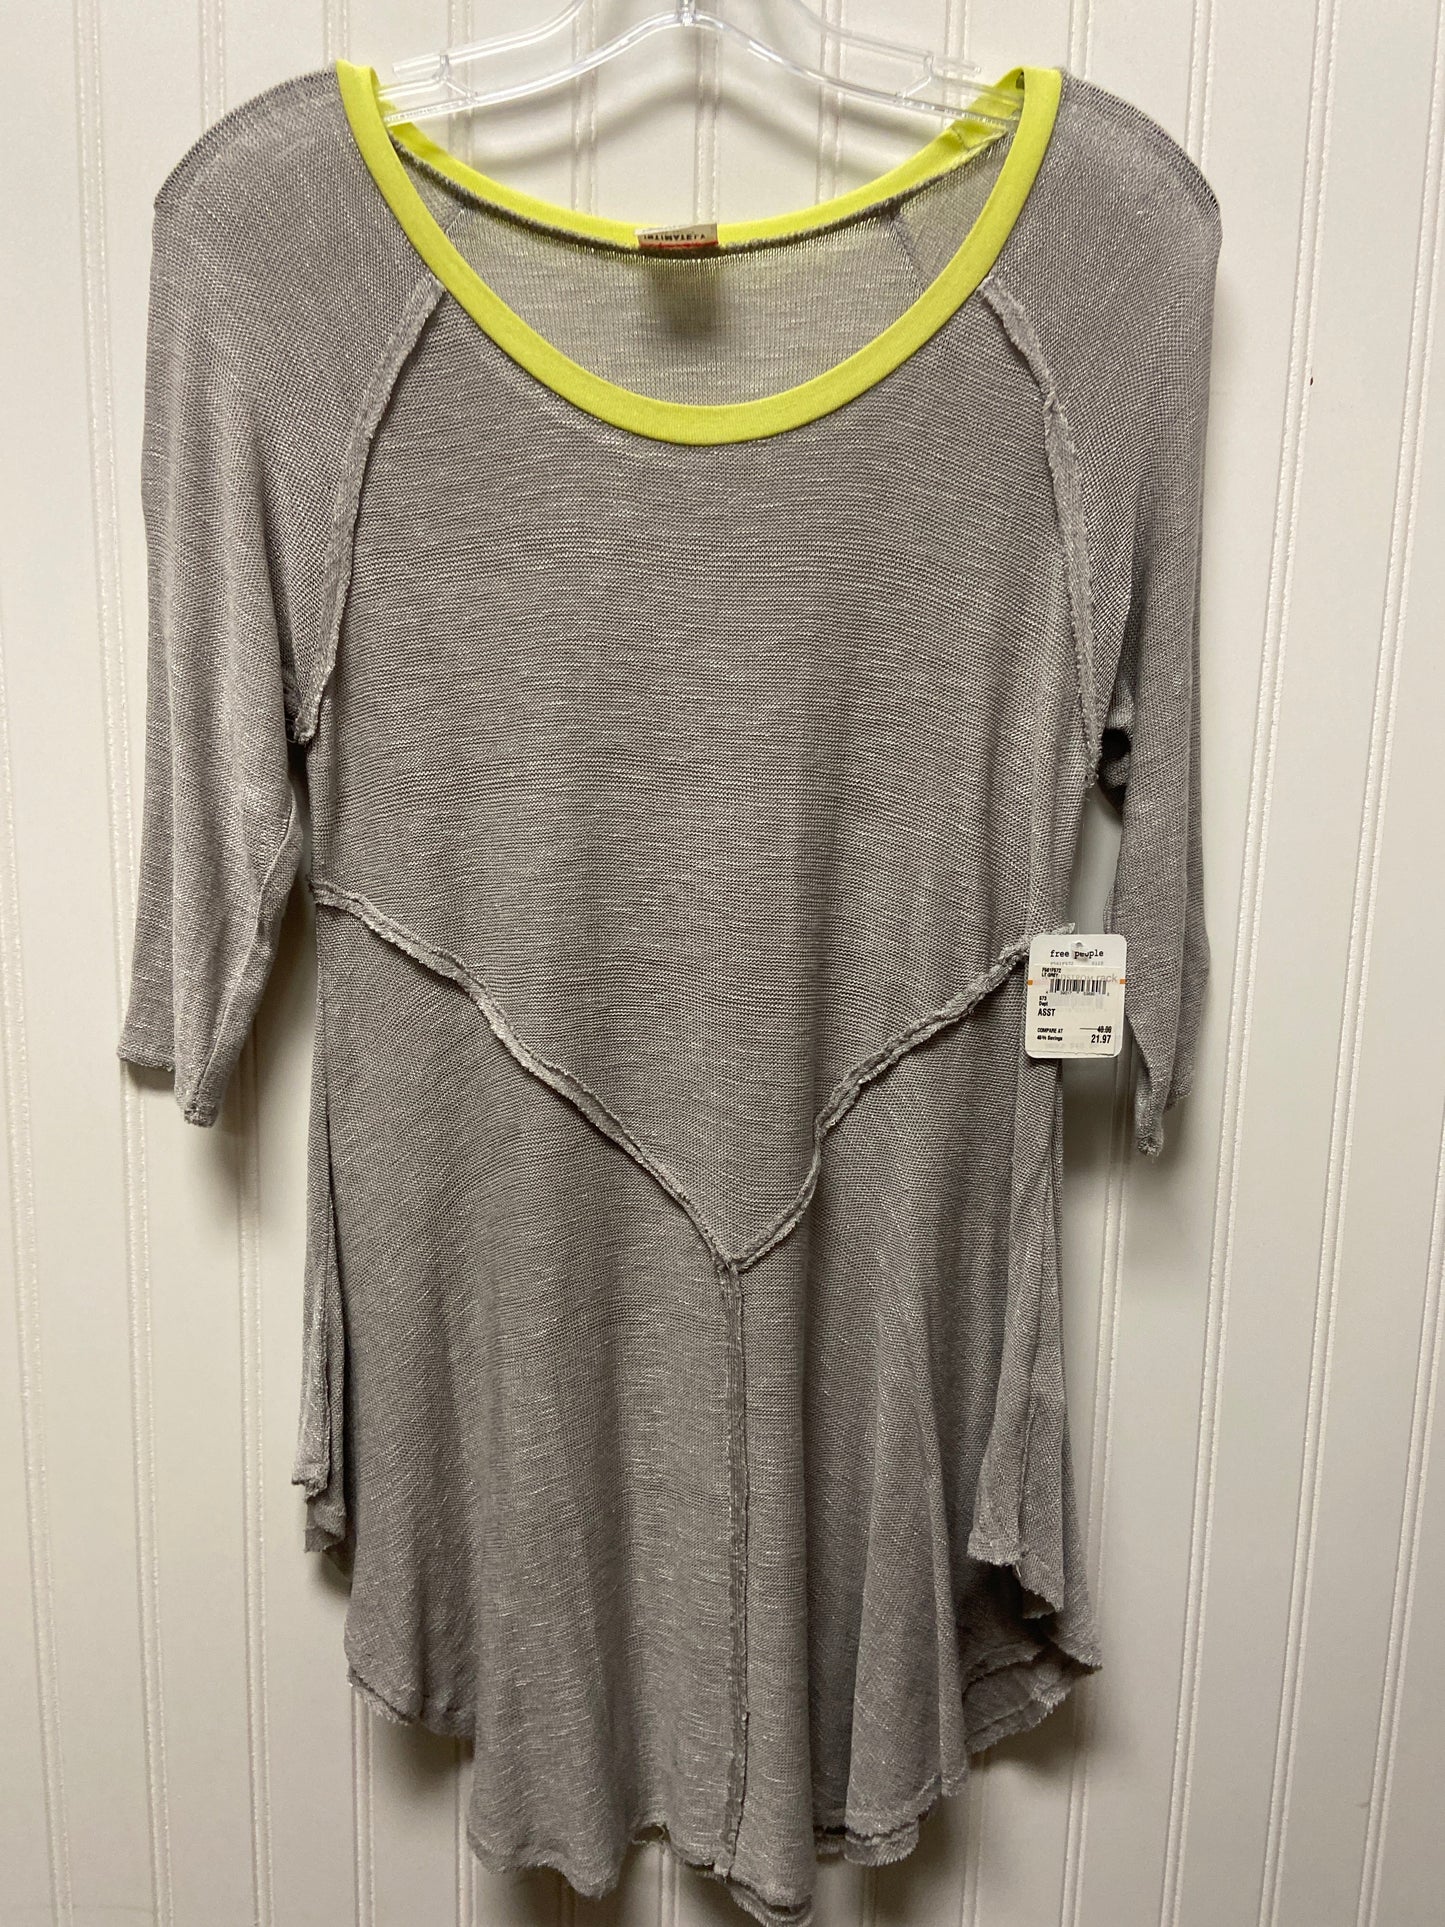 Grey Top 3/4 Sleeve Free People, Size S